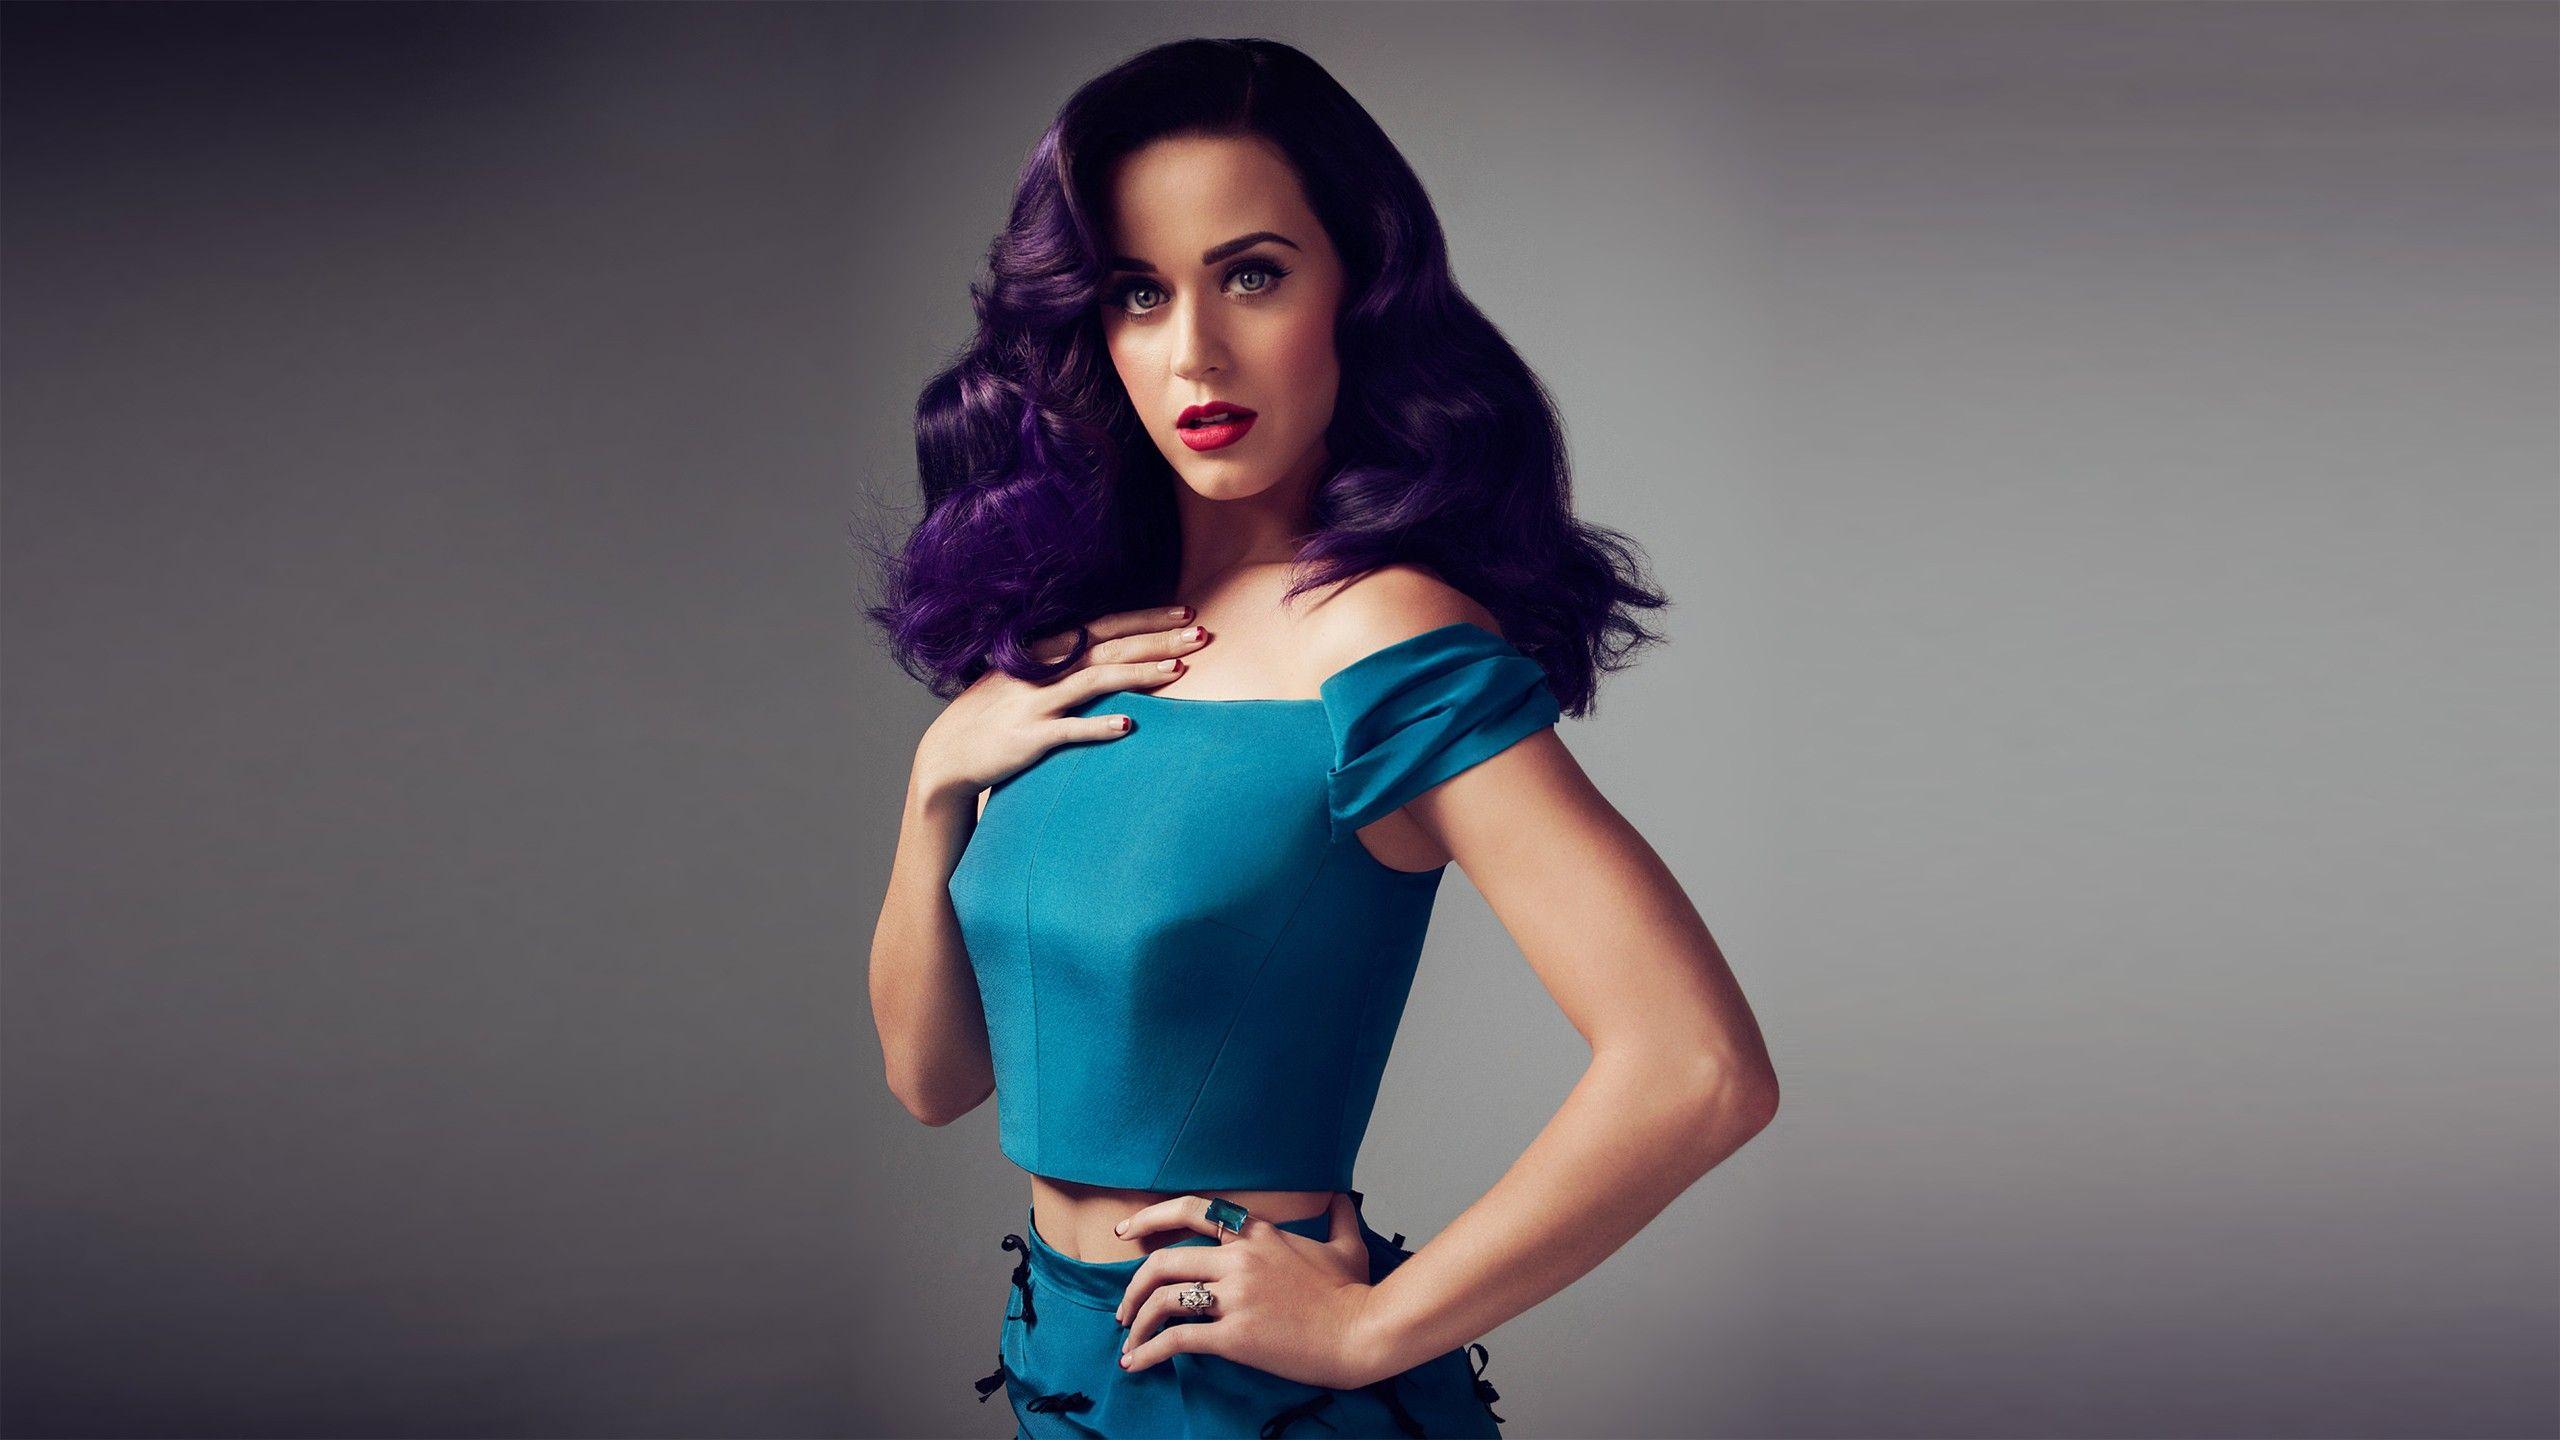 Beautiful Katy Perry Wallpapers